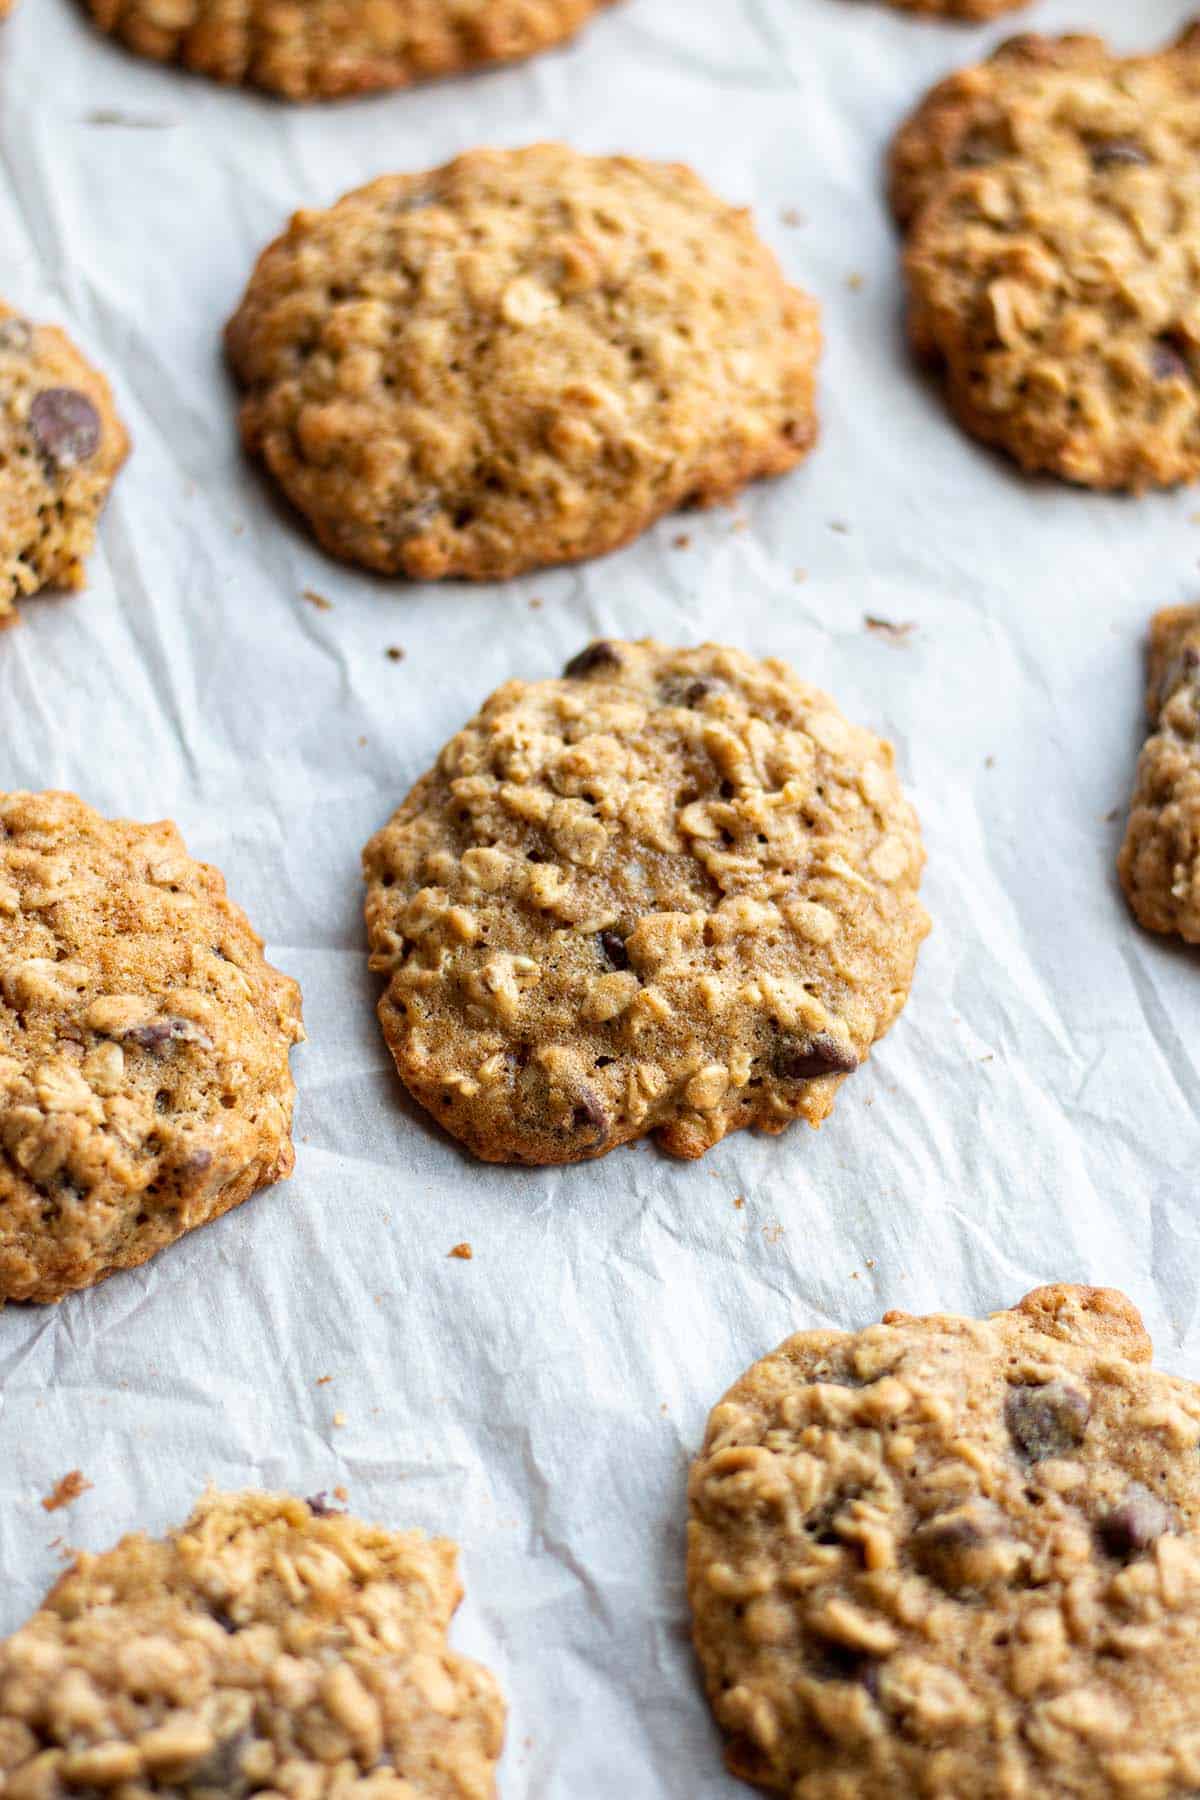 Baked oatmeal cookies on a baking sheet.